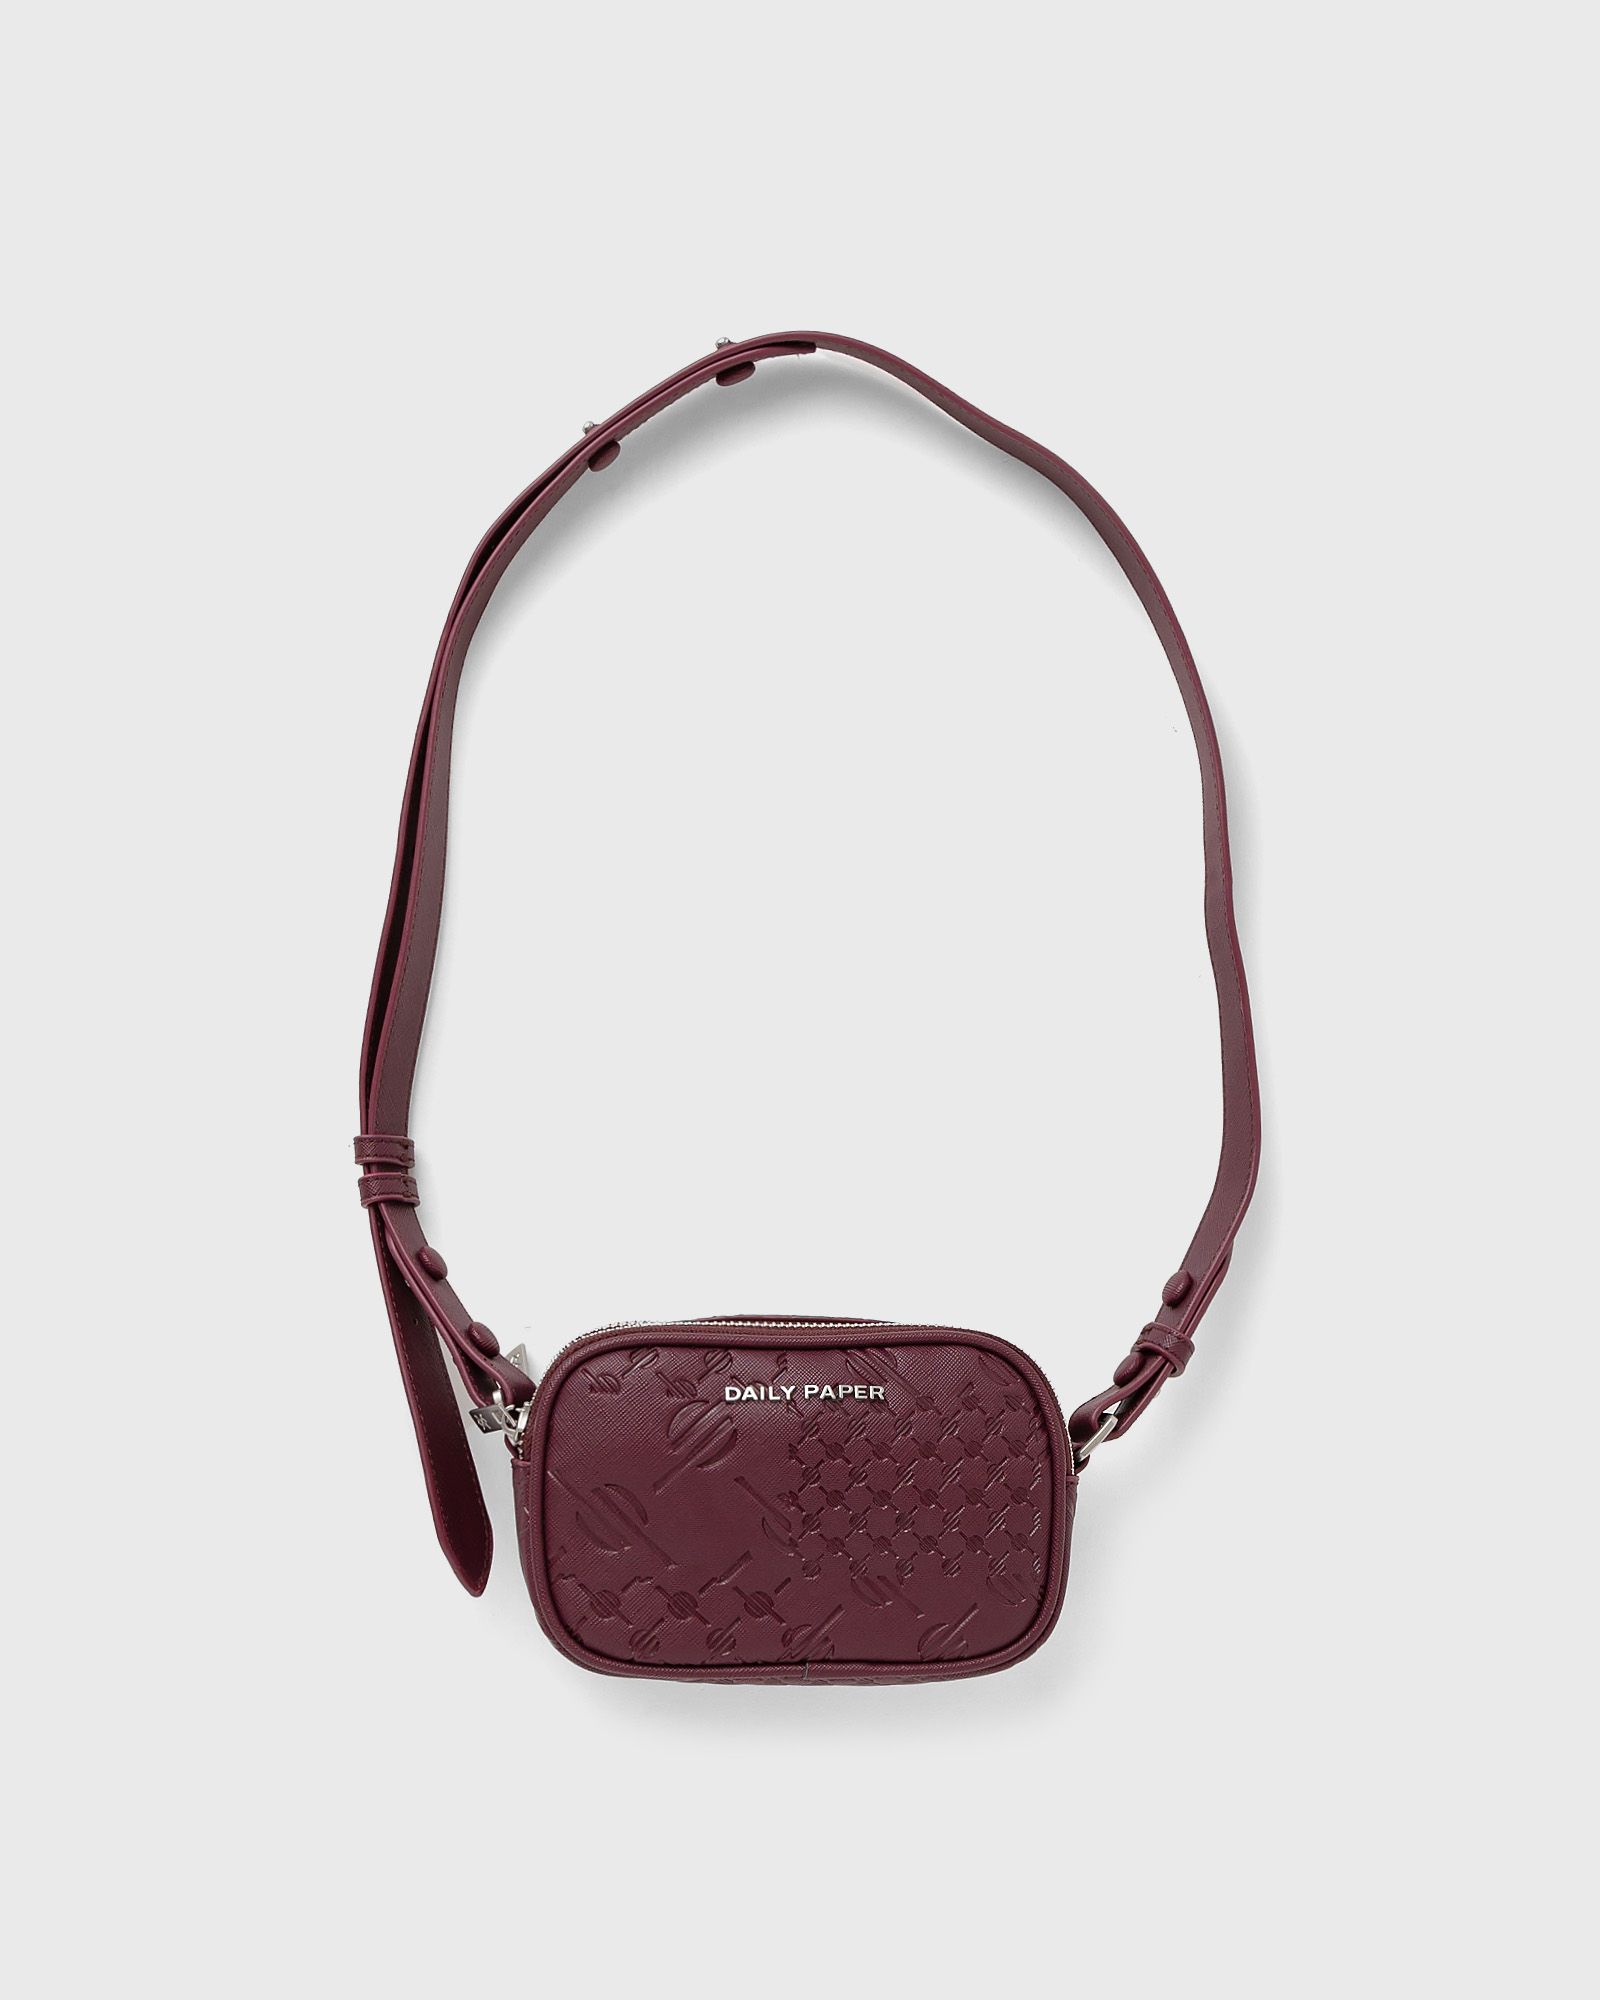 Daily Paper - nay bag women messenger & crossbody bags red in größe:one size